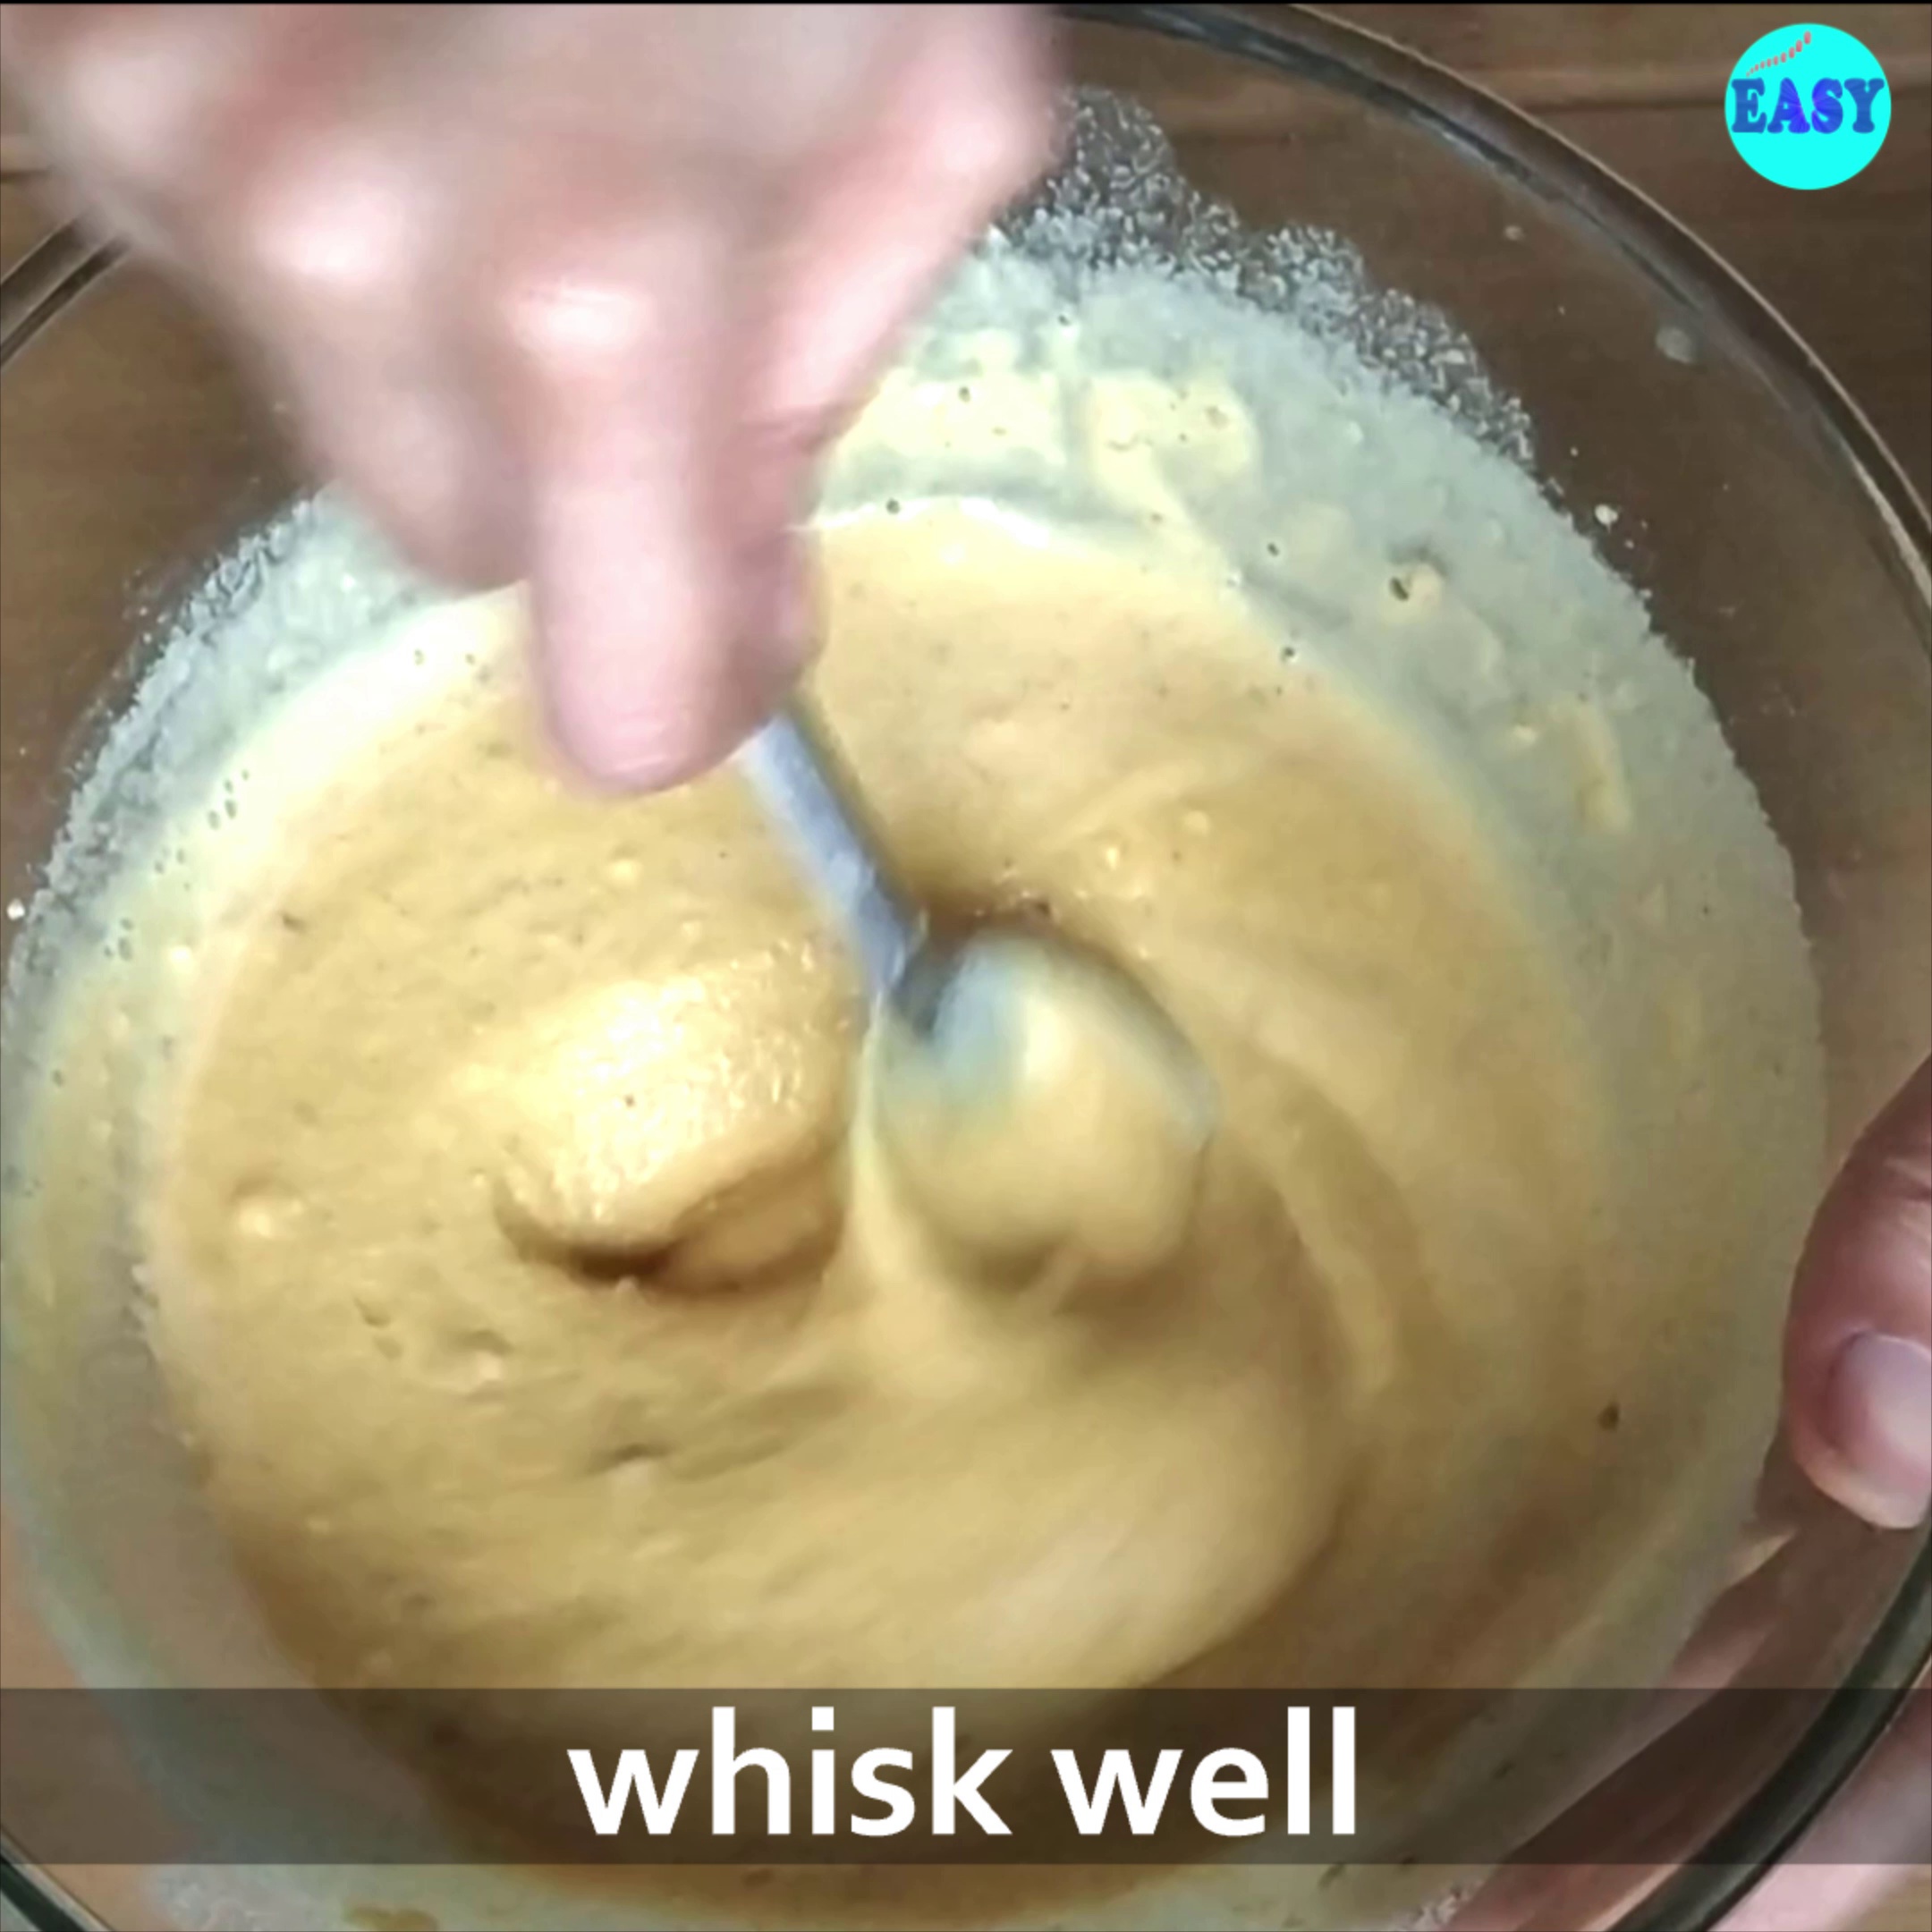 Step 3 - Whisk the batter well for 2-3 minutes to ensure all the lumps are removed. Let the batter rest for 3-4 minutes.